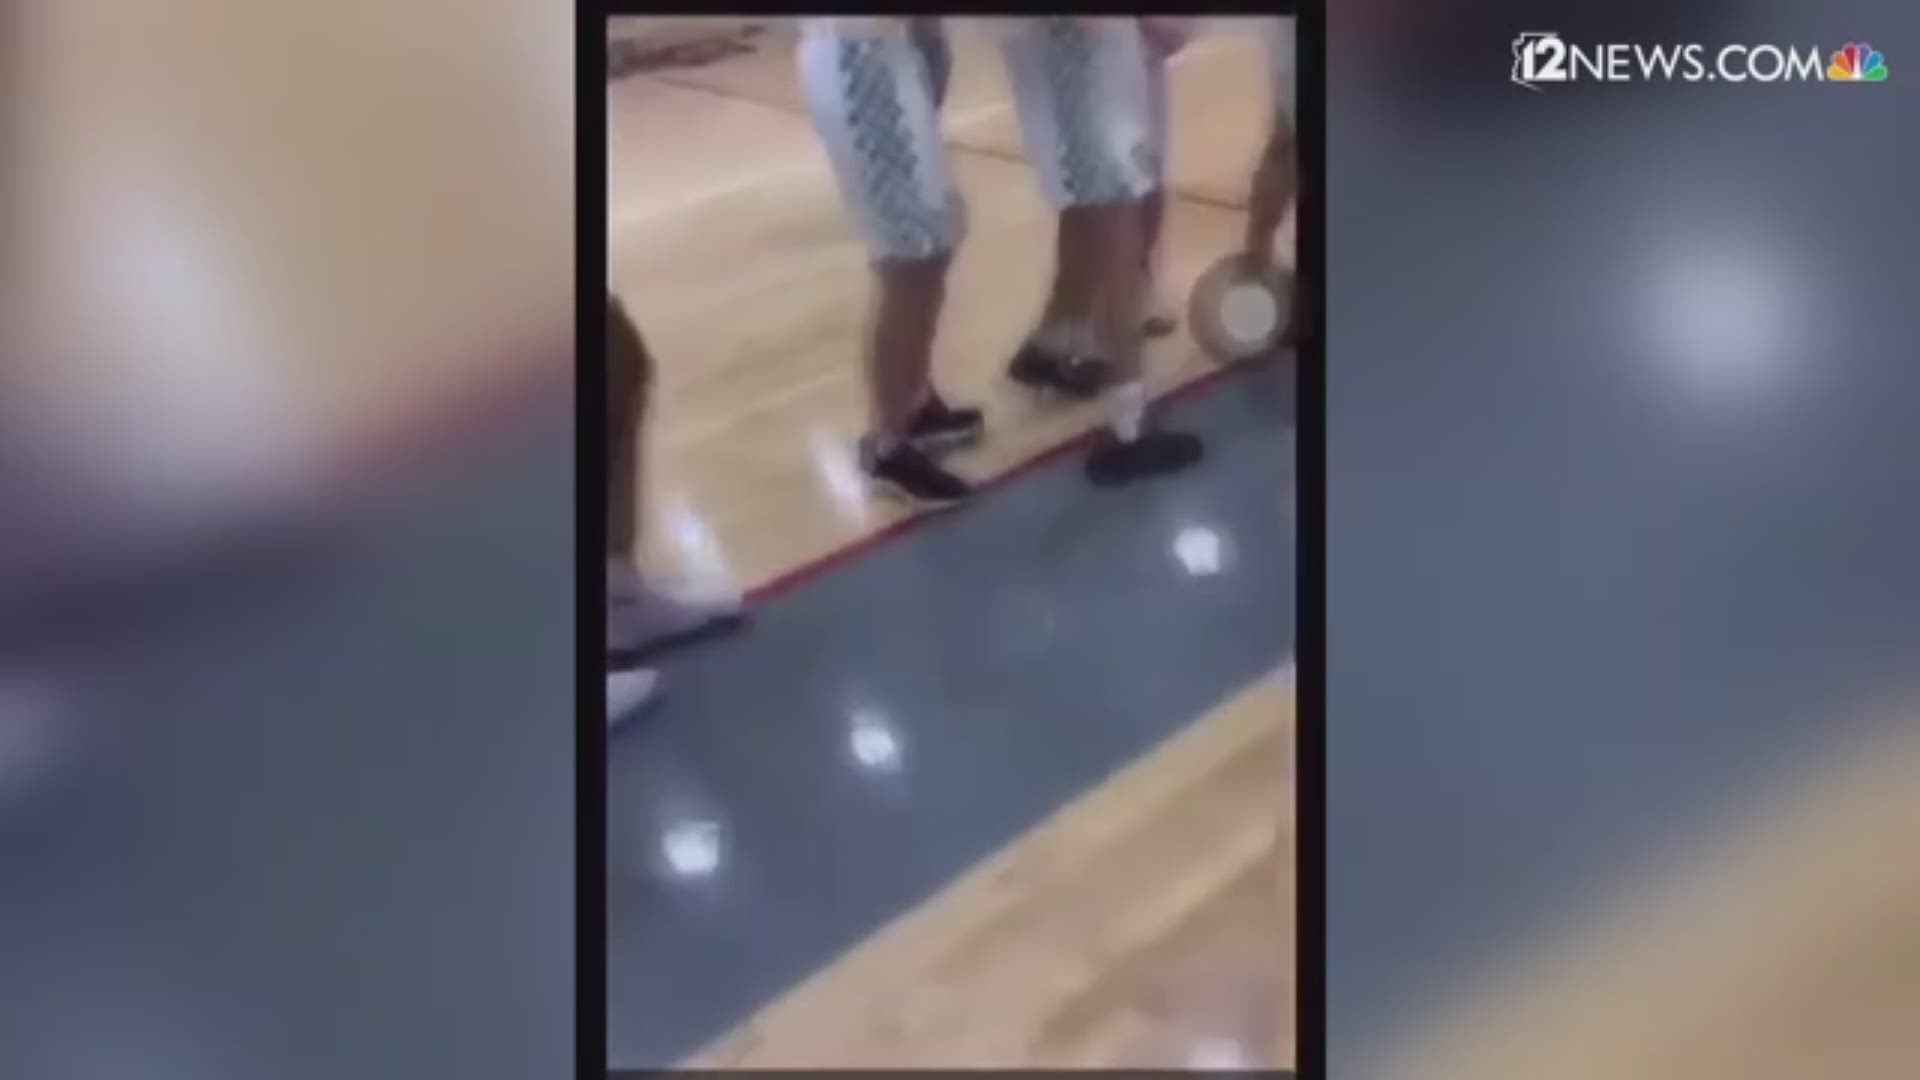 A post-game practice meant as a gesture of good sportsmanship erupted into a full-out brawl at a high school basketball game on Saturday night.